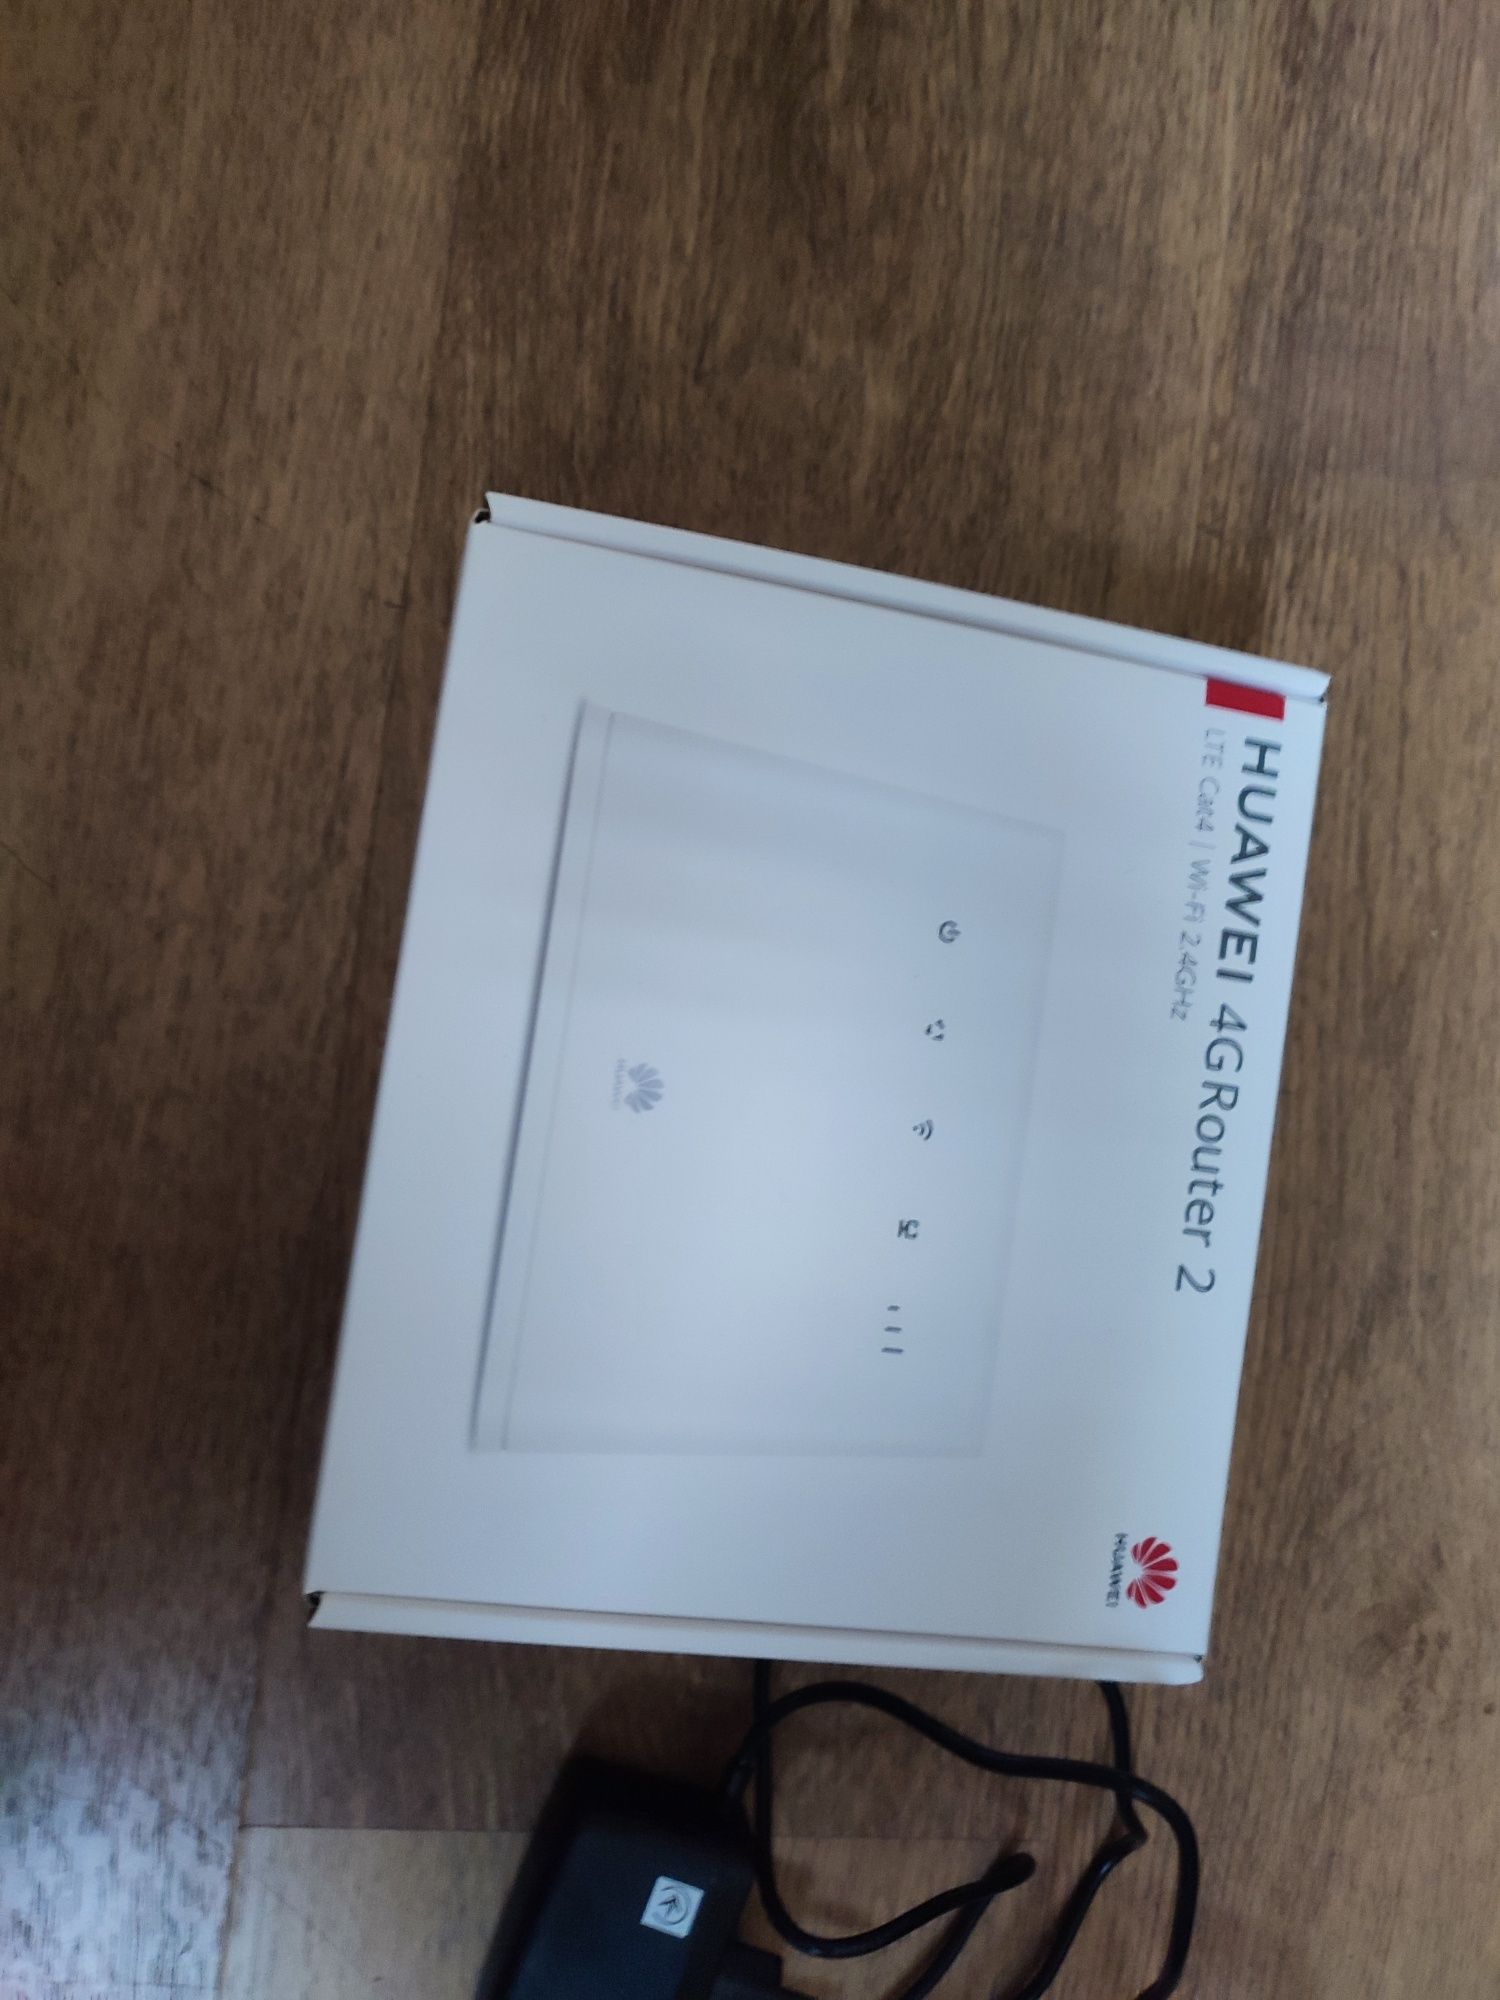 Huawei 4 G Router 2 LTE Cat 4/ Wi-Fi 2.4 GHz